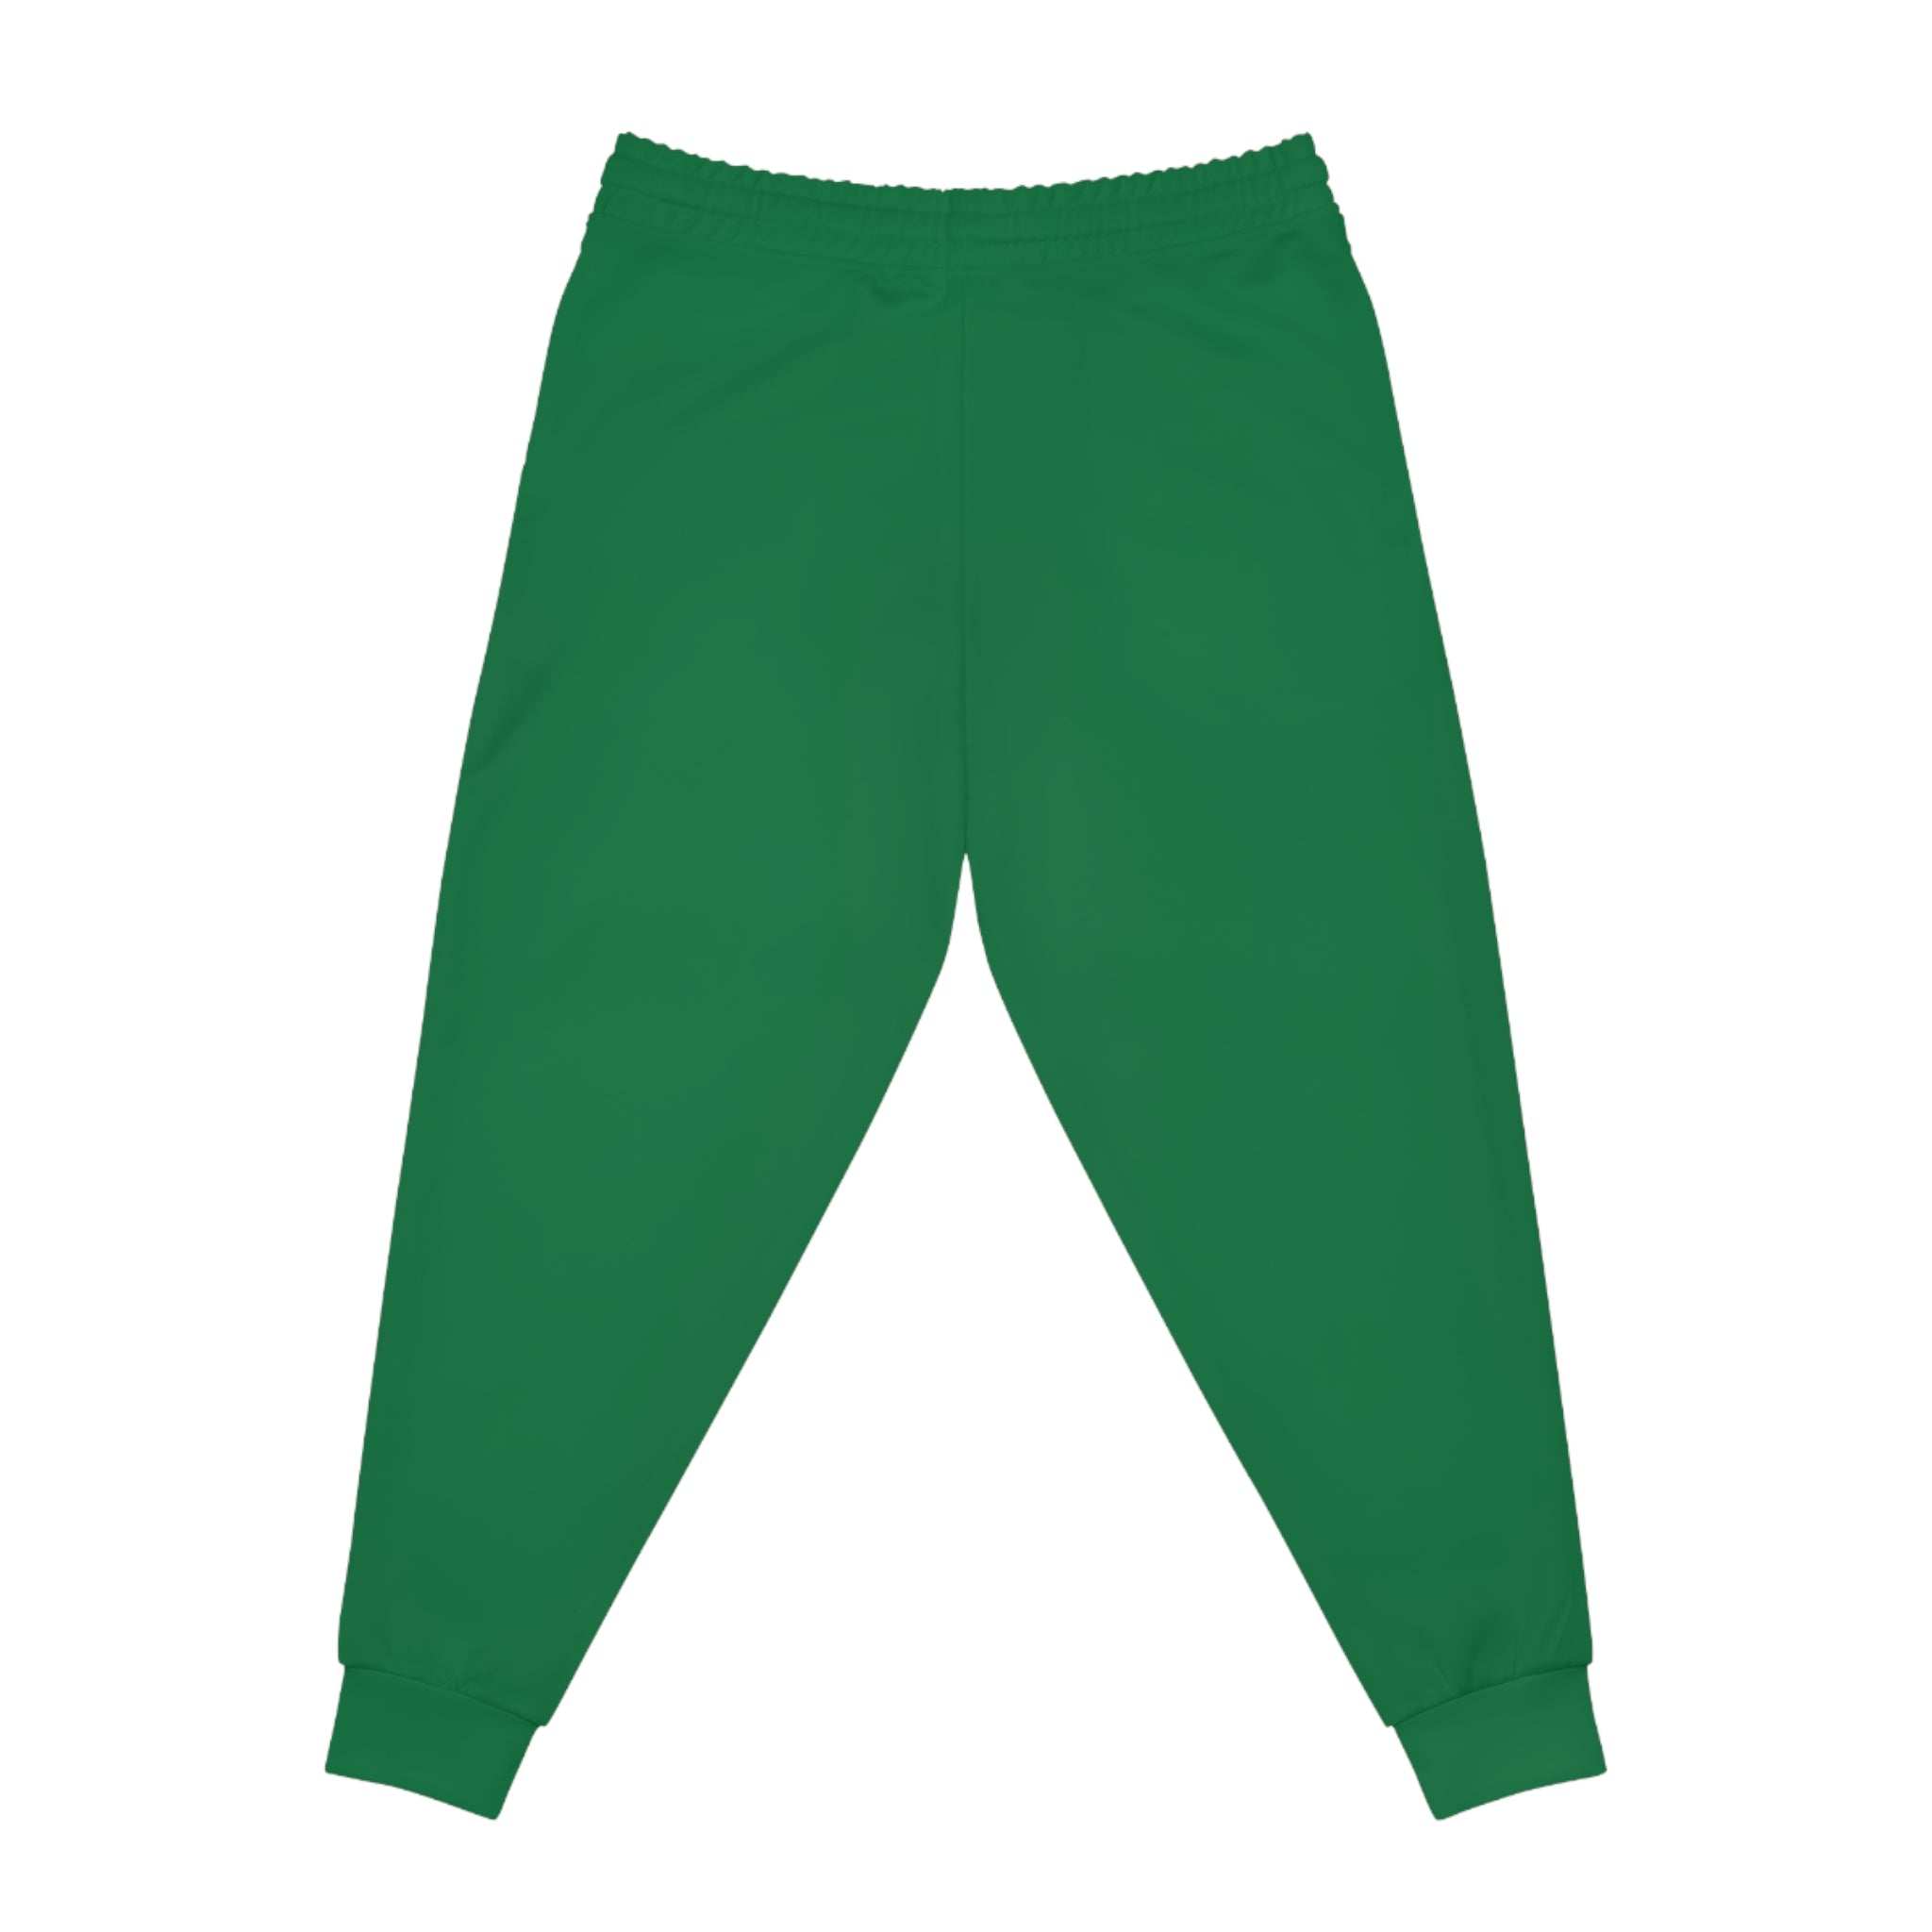 CombinedMinds Athletic Joggers Dark Green/White Logo